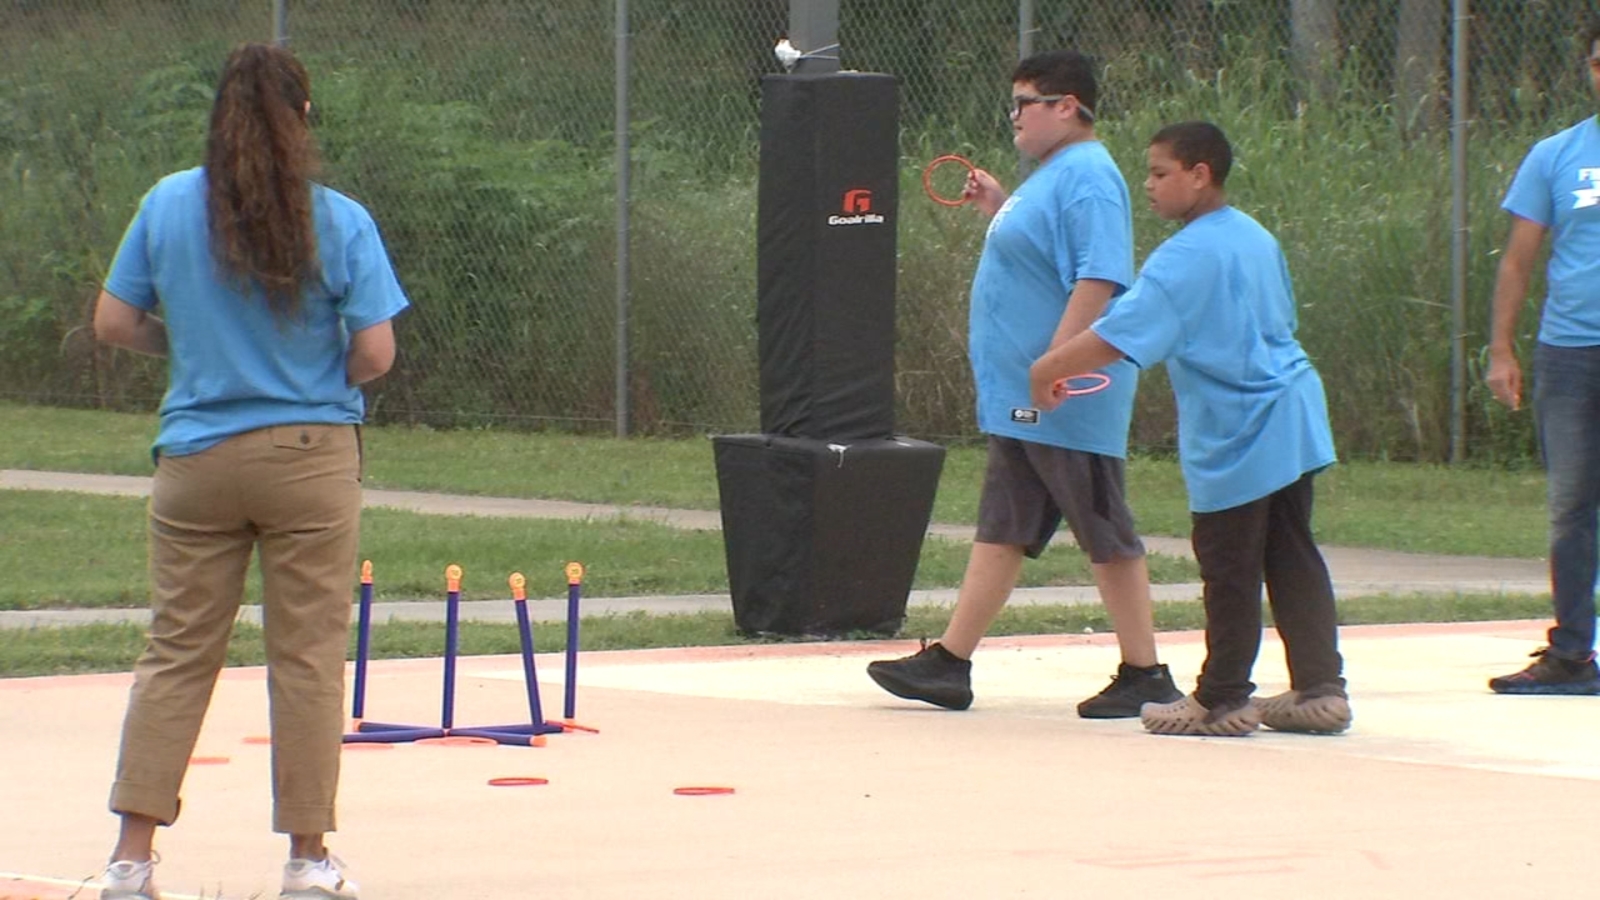 Houston-based autism support agency hosts inclusive Field Day event for Autism Acceptance Month [Video]